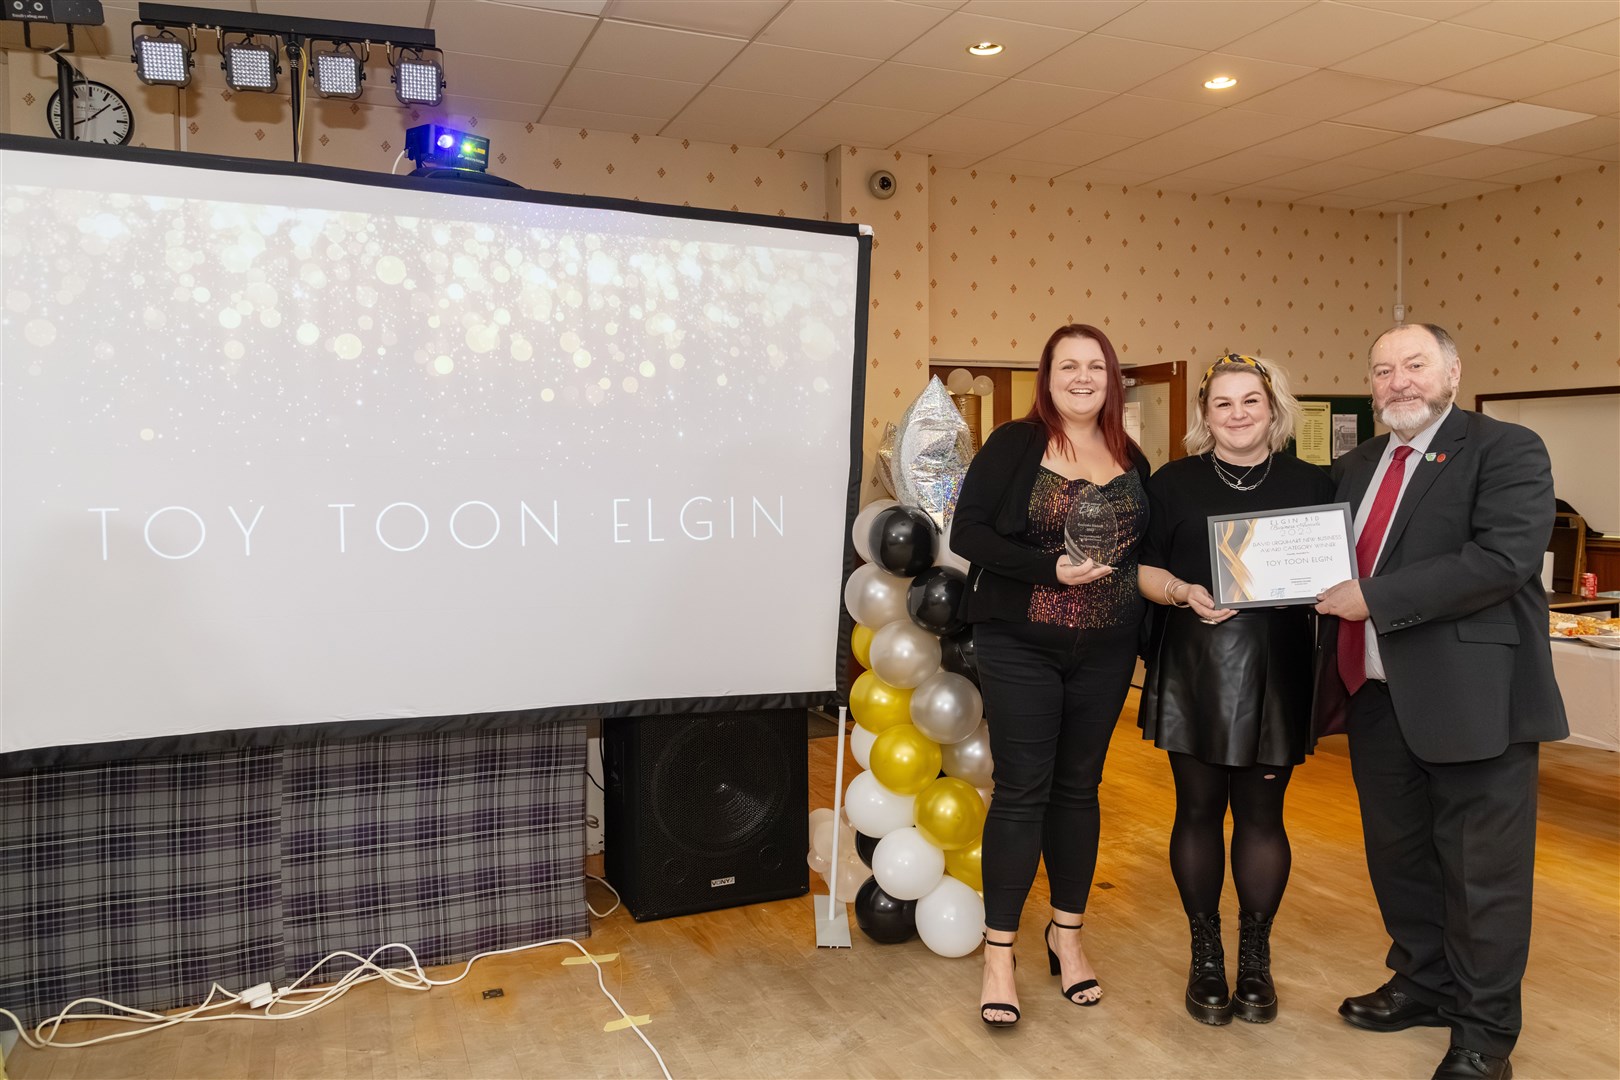 John Divers presenting the David Urquhart new business award to Toy Toon business partners and friends Jacqueline Main (left) and Katy Larkworthy. Picture: Beth Taylor.